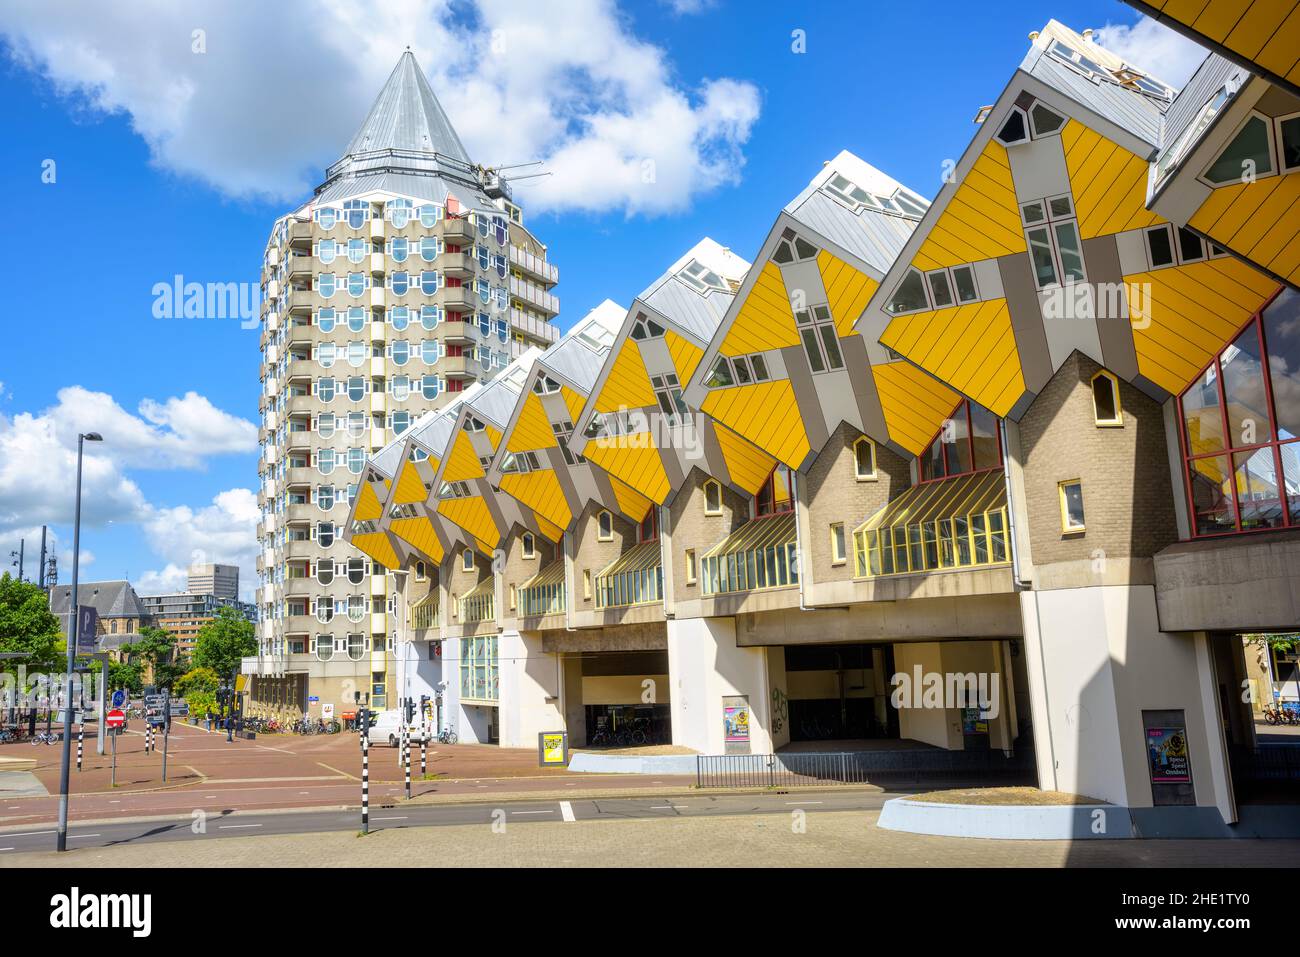 Rotterdam, Netherlands - 20 July 2020: The Cube houses, an outstanding example of contemporary architecture, are one of the most famous landmarks in R Stock Photo